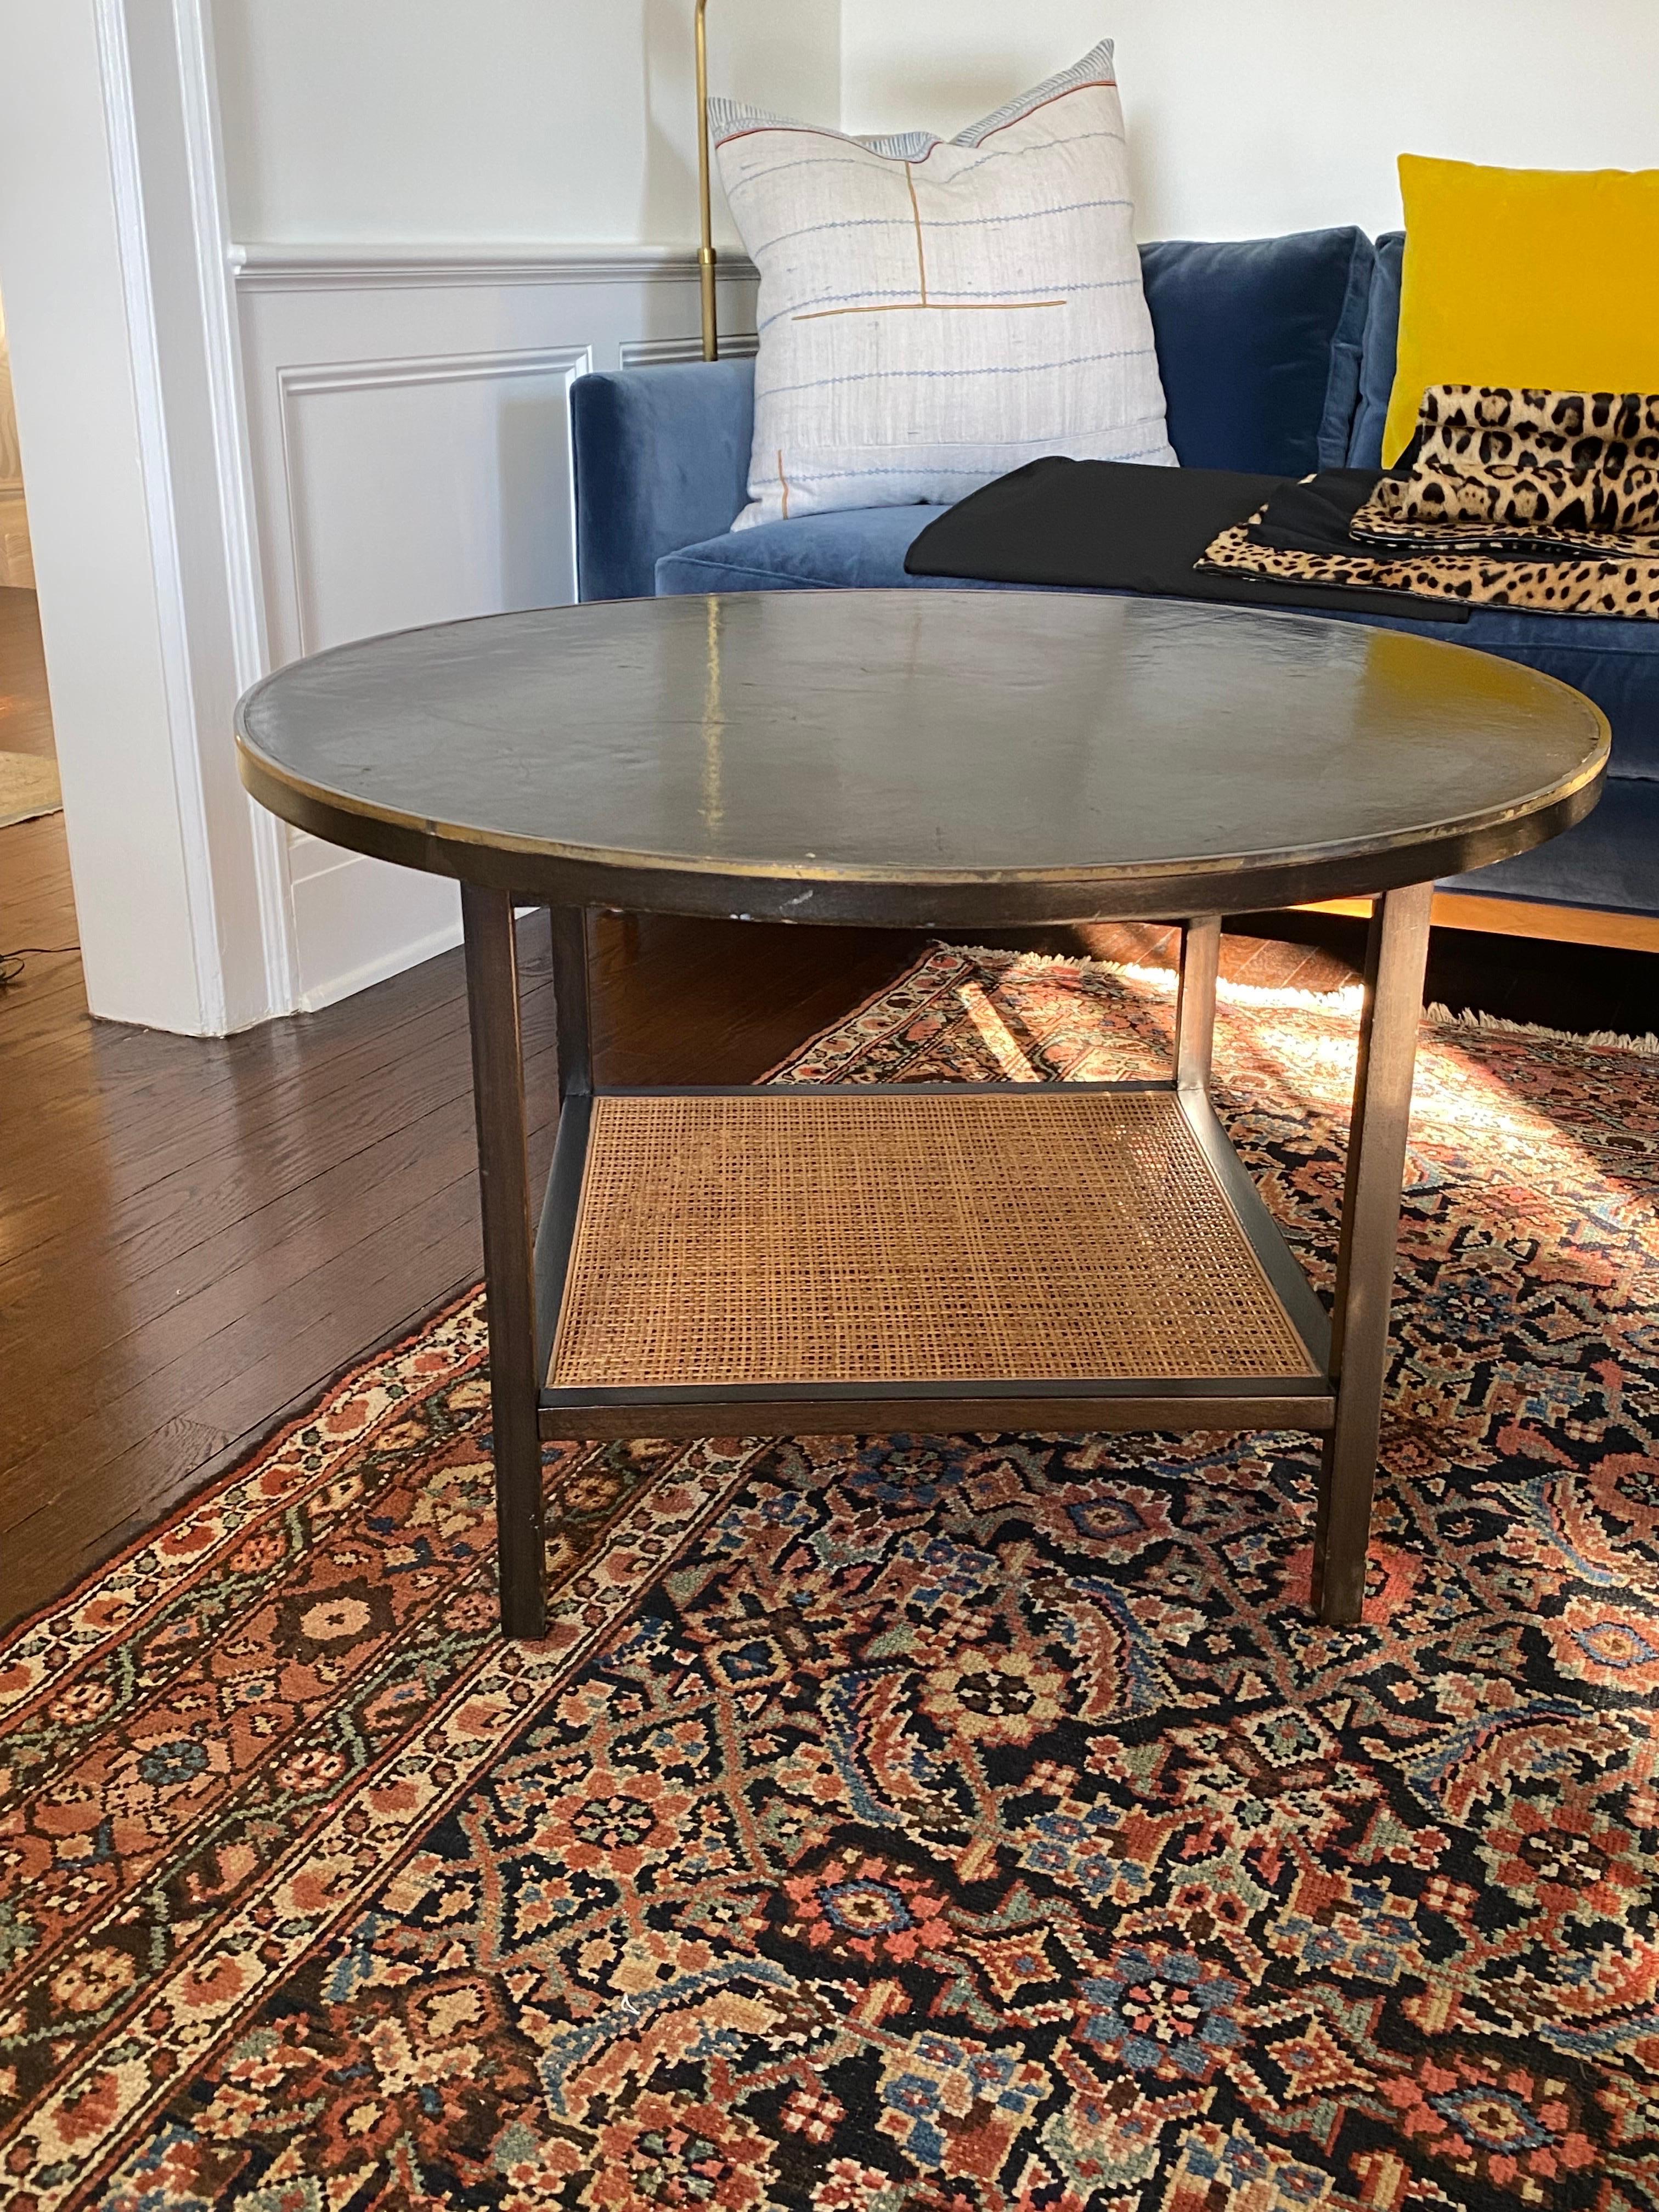 Paul McCobb for Calvin Round Mahogany Table with Reed Shelf & Brass Edge Trim.
A great looking side table or round coffee table. Brass edging around round top. Mahogany top and frame with lower reed shelf. General wear, scuffs and scratches to